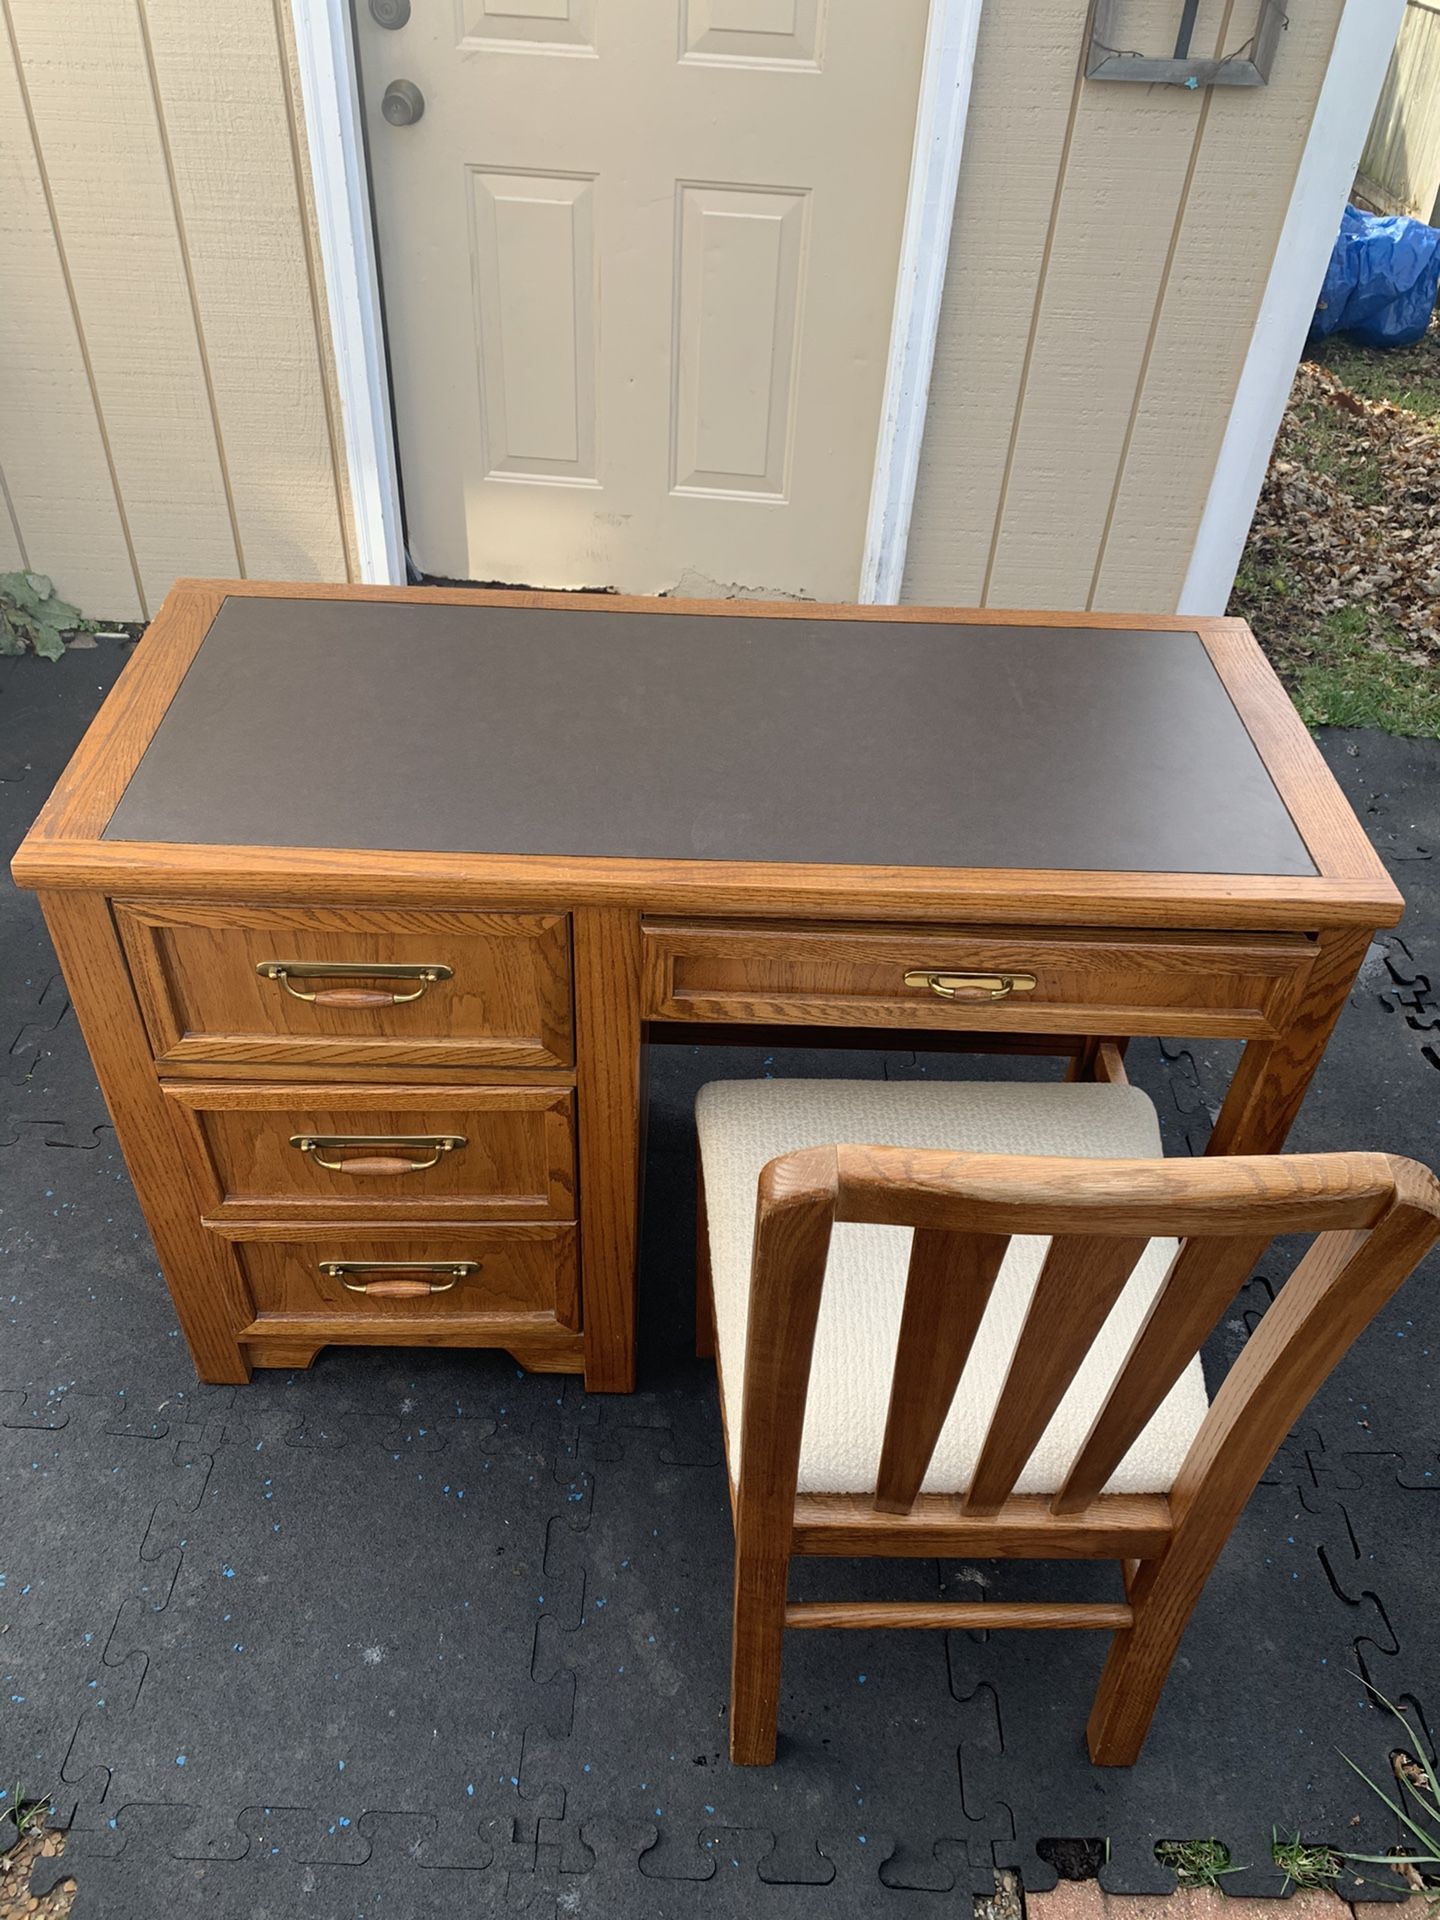 Desktop And Chair In Great Condition Must Pick Up Today ..